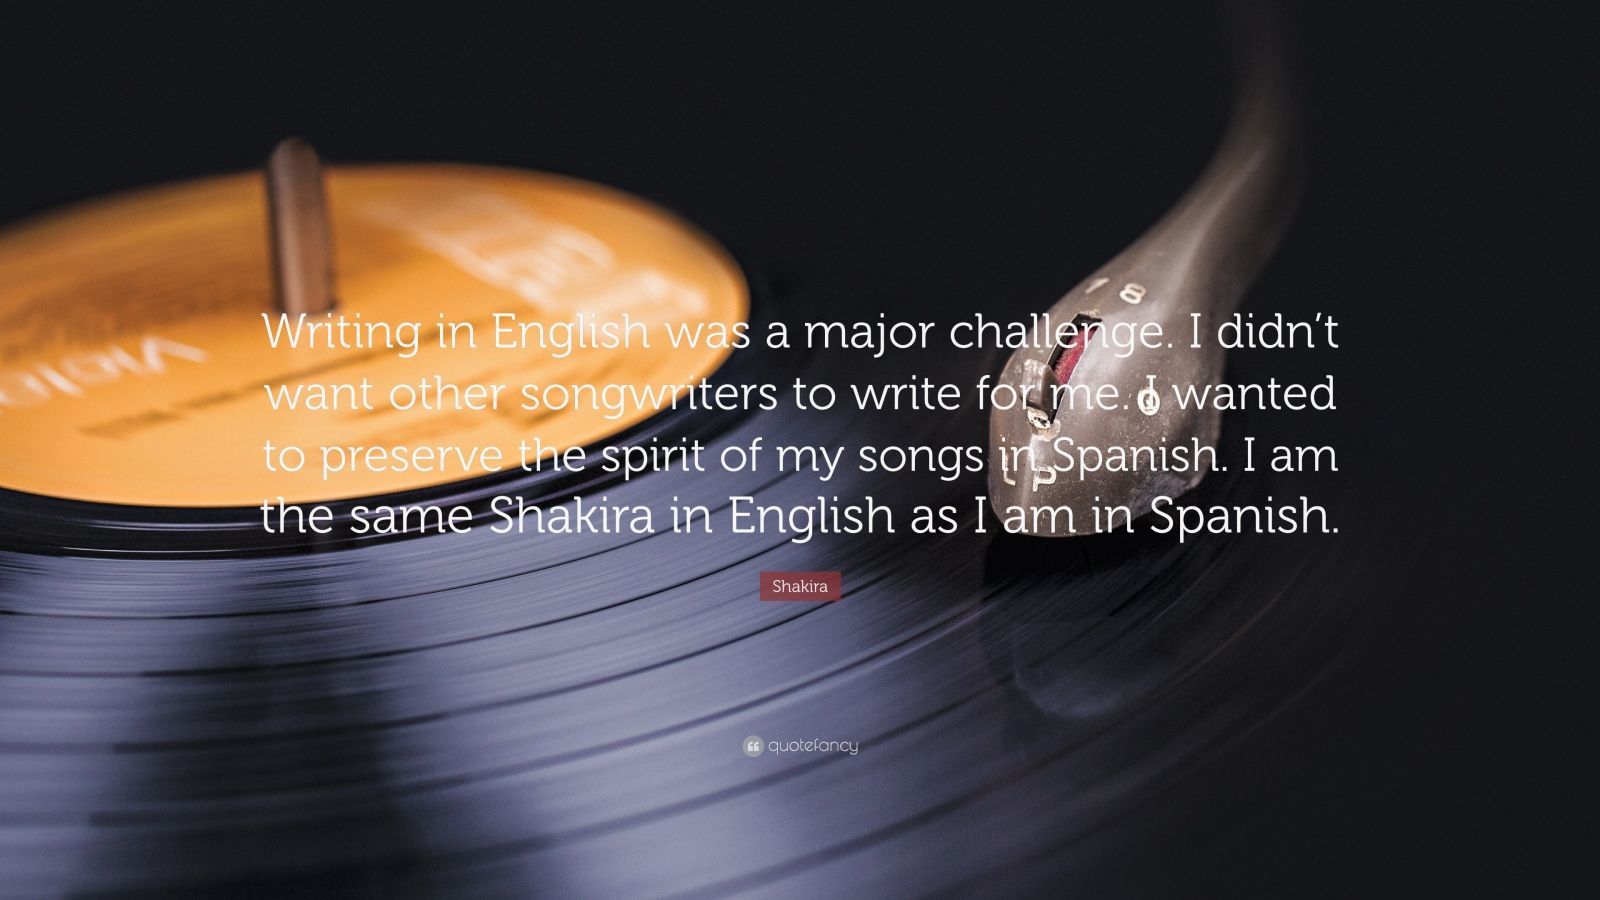 Shakira Quote: “Writing in English was a major challenge. I didn’t want other ...1600 x 900